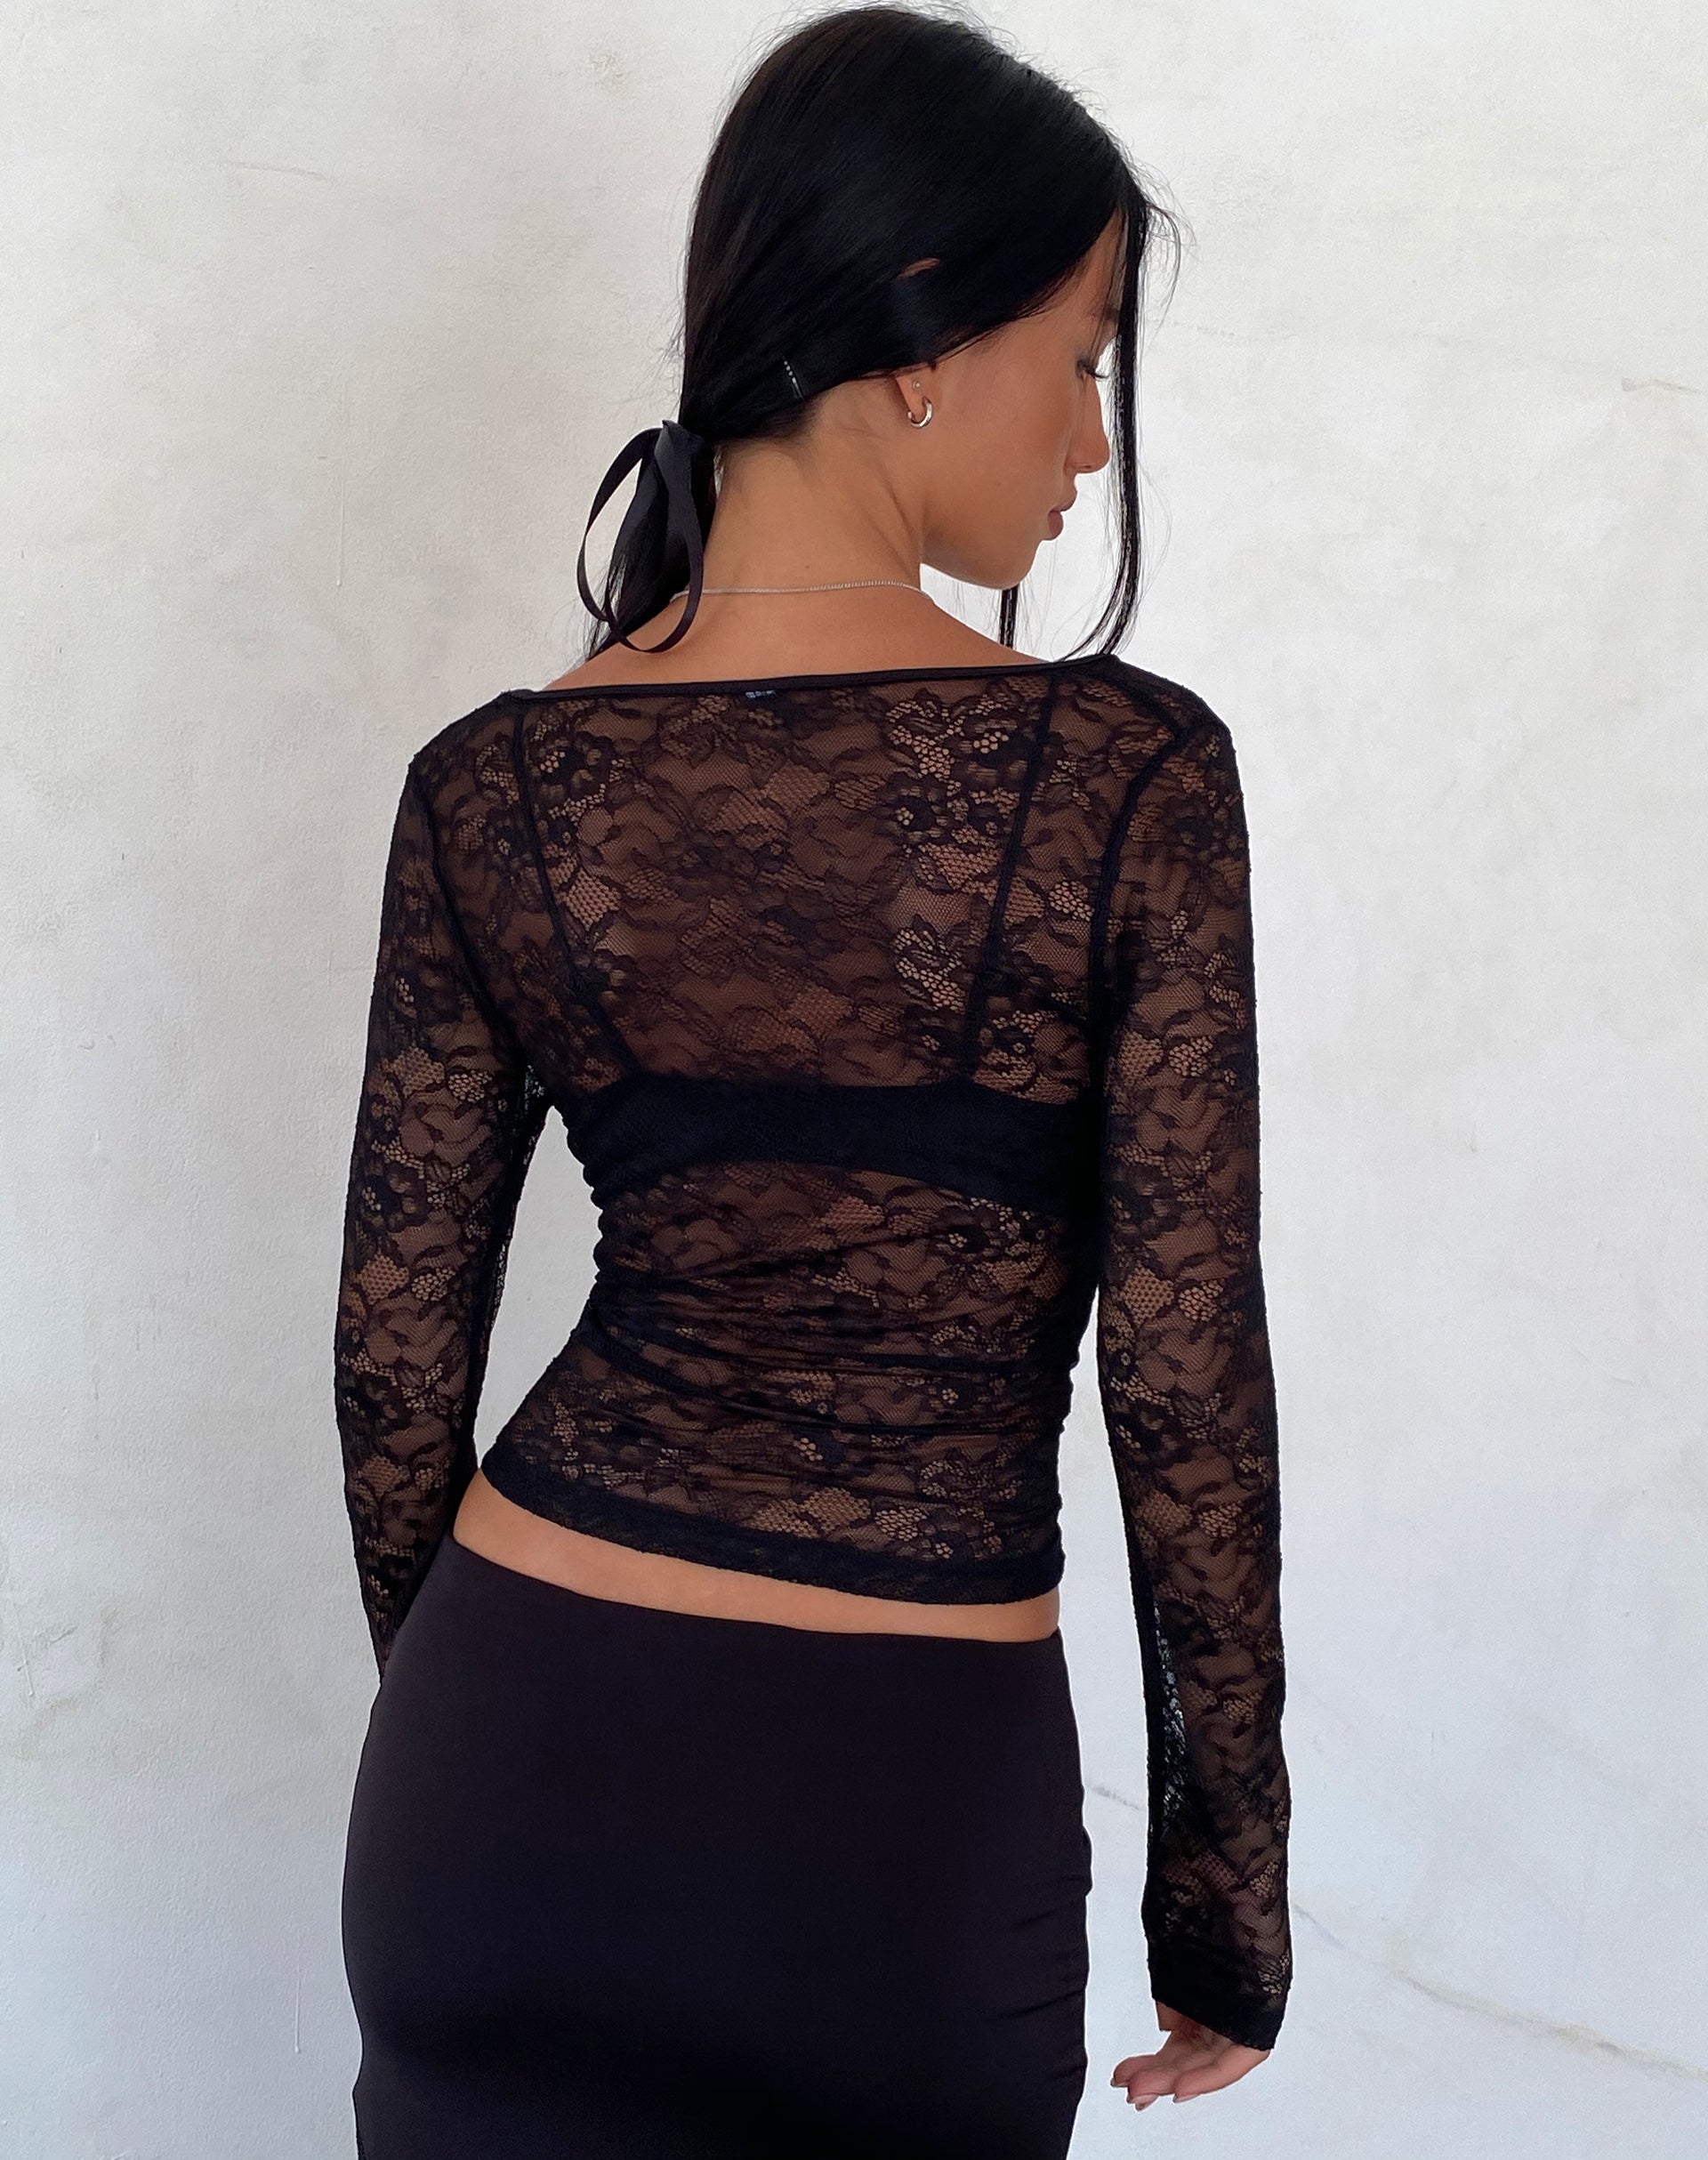 Image of Lainey Unlined Long Sleeve Top in Black Lace